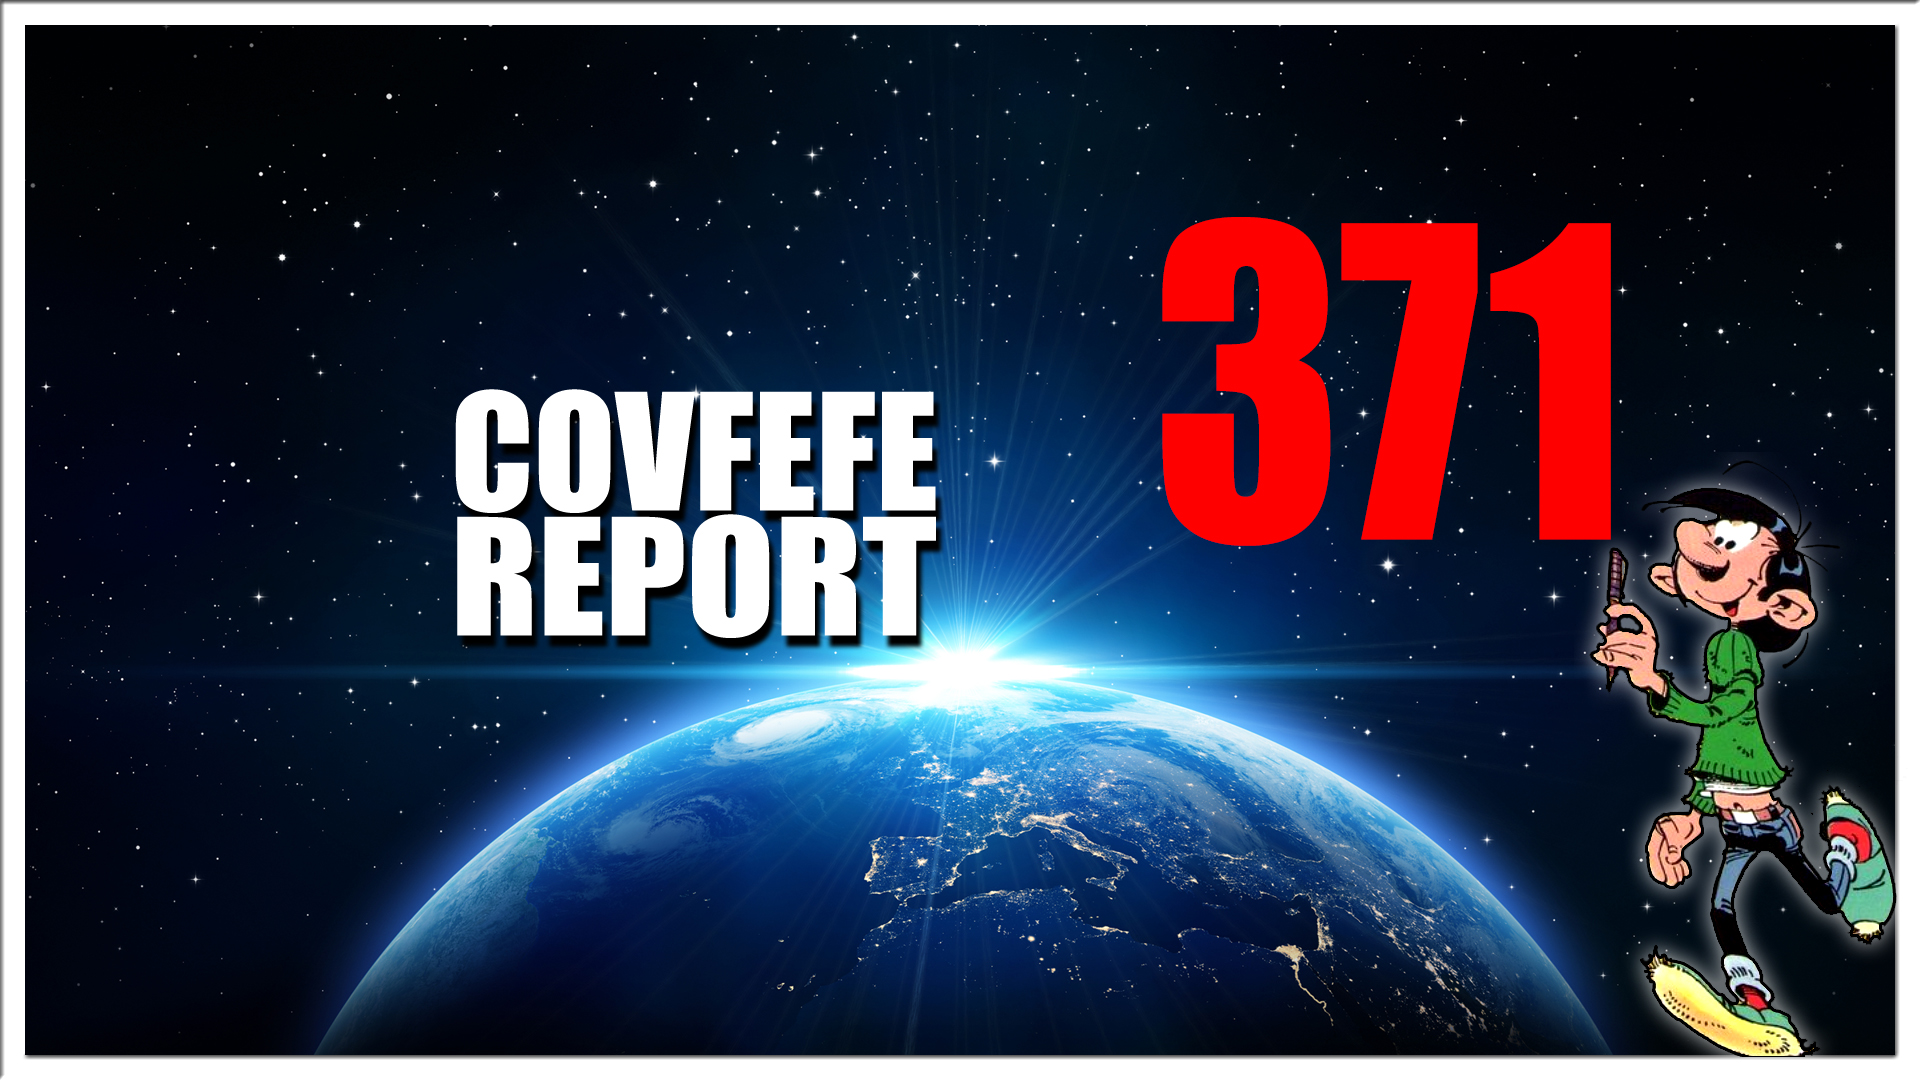 Covfefe Report 371. 17 is alom aanwezig, Trust the plan, He did it his way, Hold the line